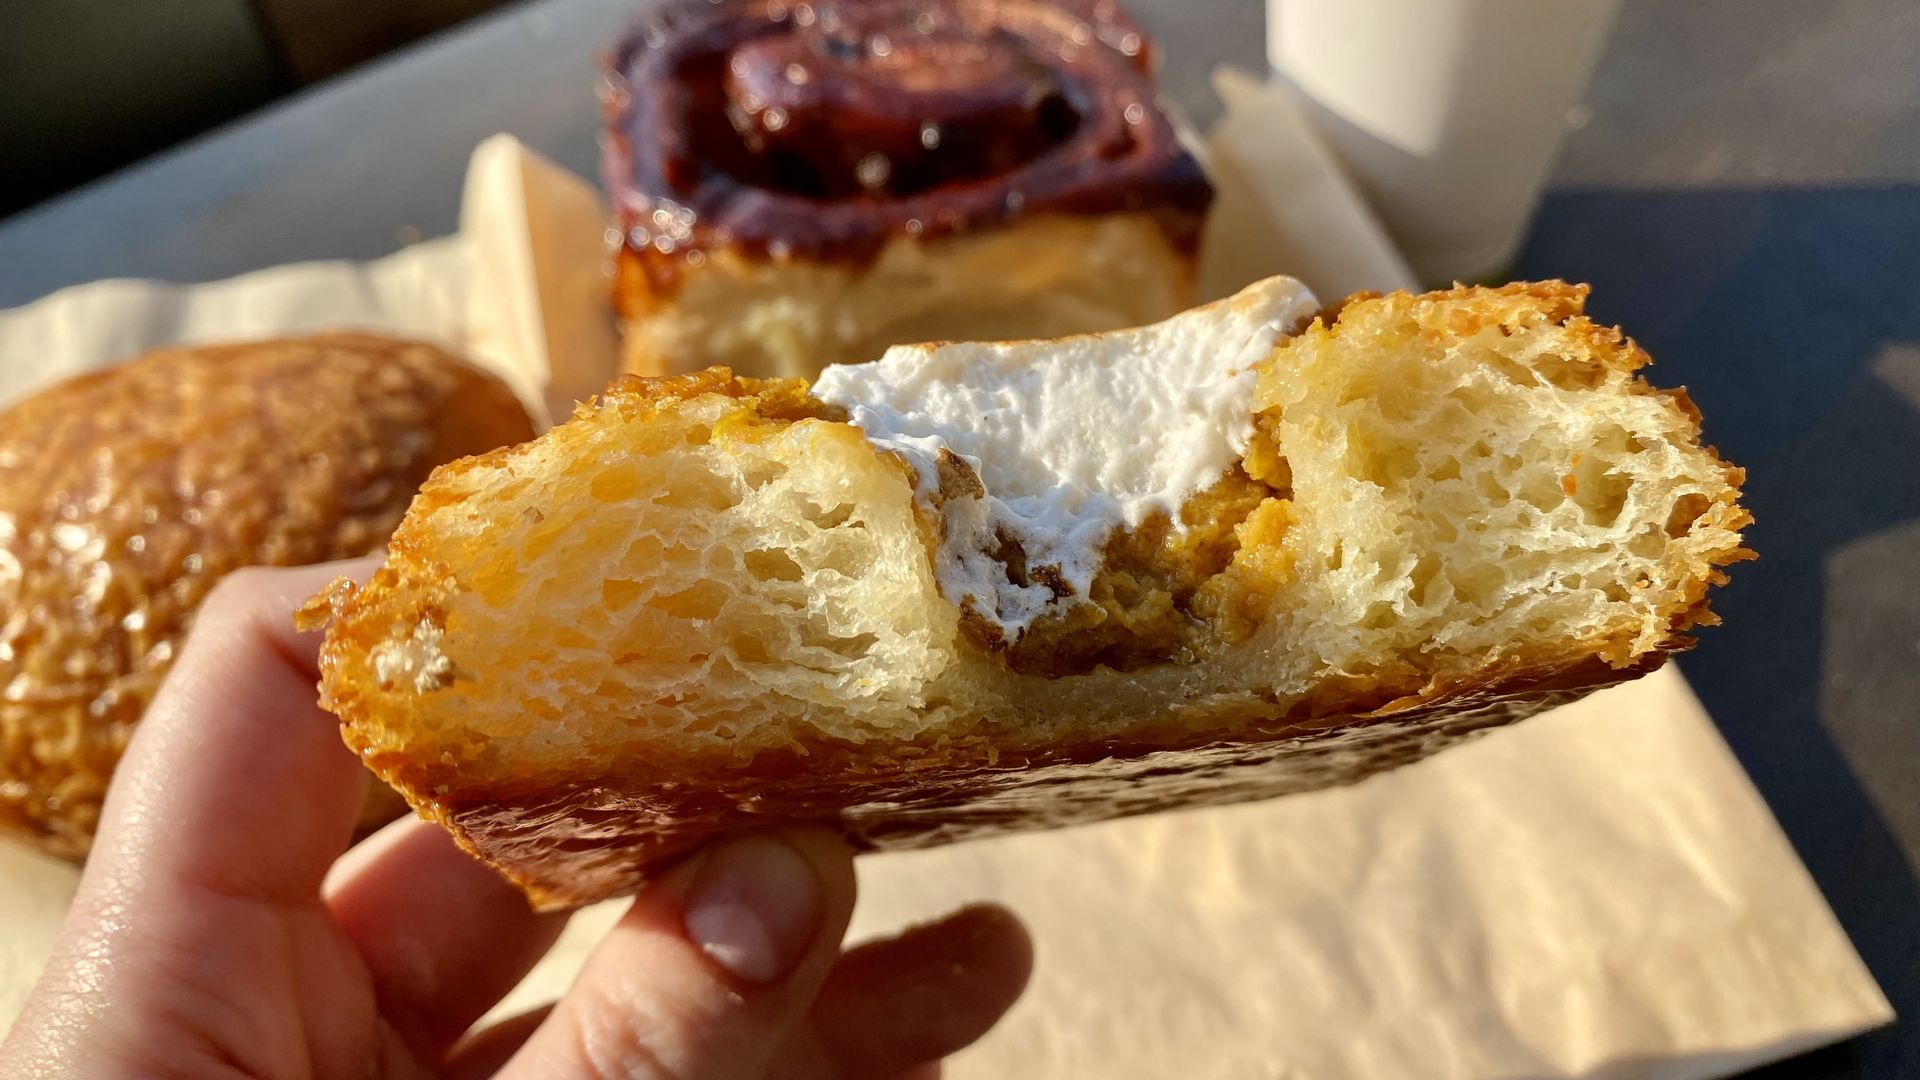 A hand holds a croissant that is bitten into already, with orange colored filling and a smear of white on top, with other pastries and a  cappuccino in background.